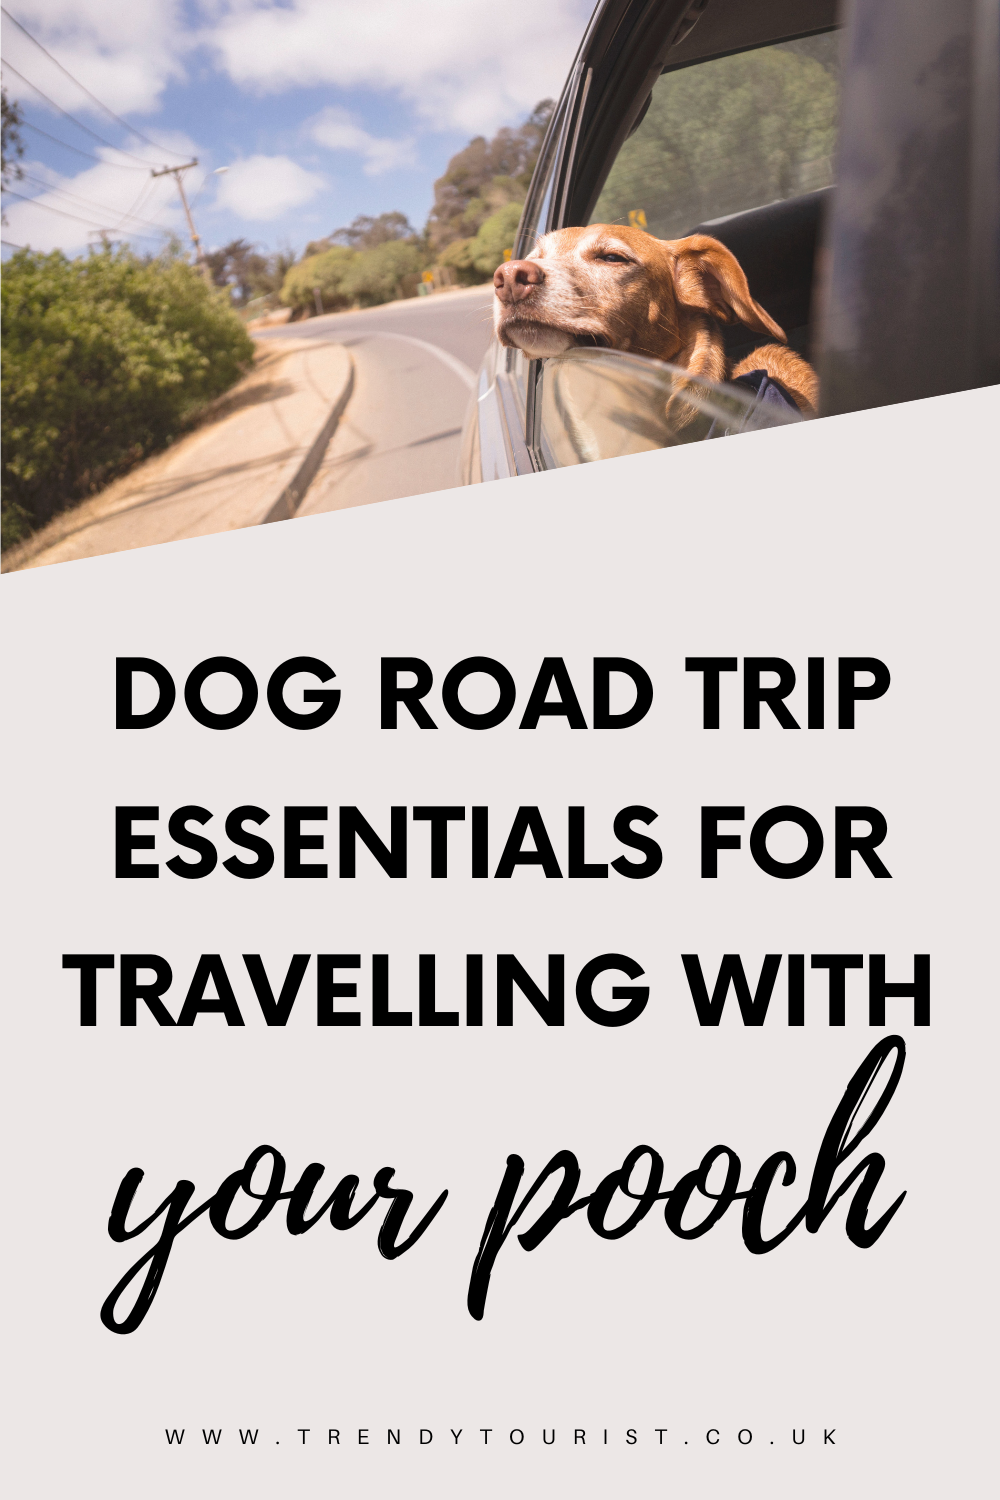 Dog Road Trip Essentials for Travelling With Your Pooch